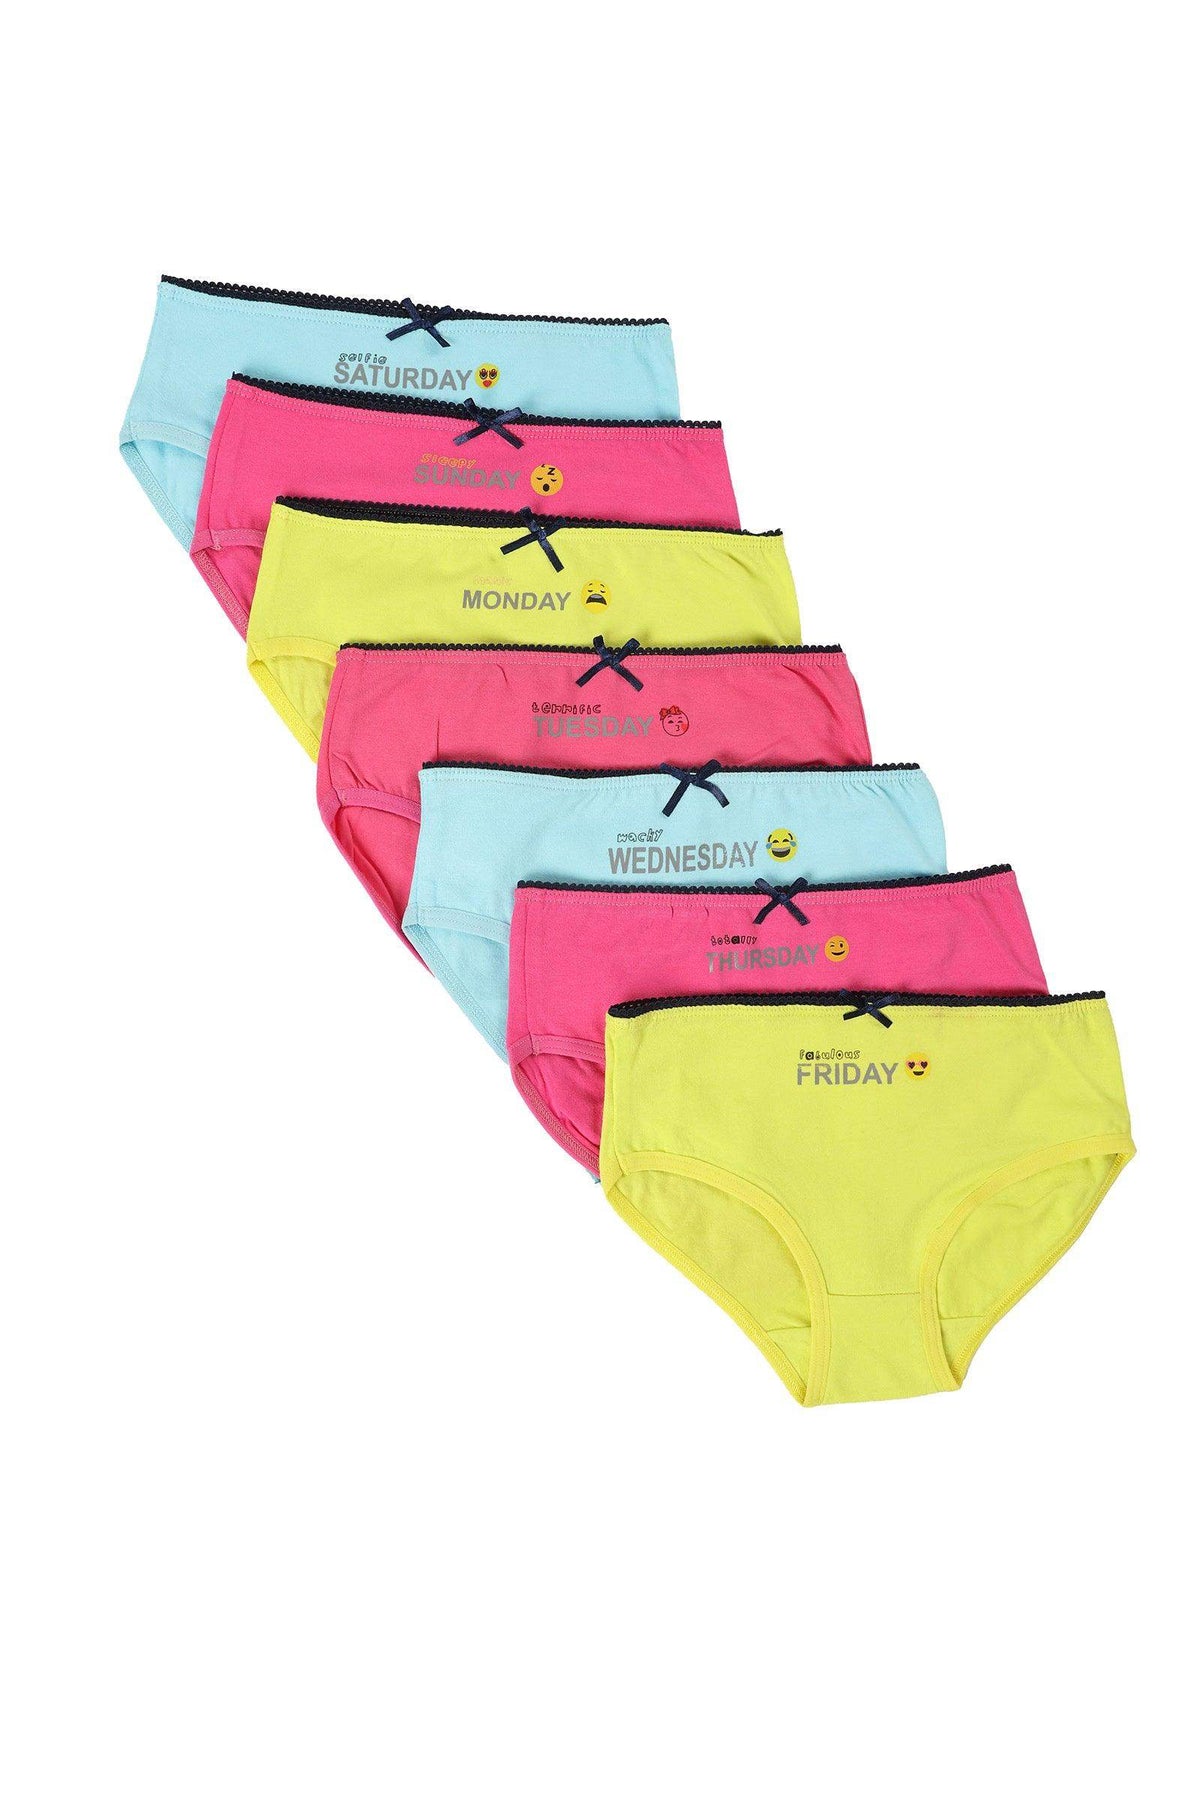 Girly Cotton Briefs (Pack of 7) - Carina - كارينا